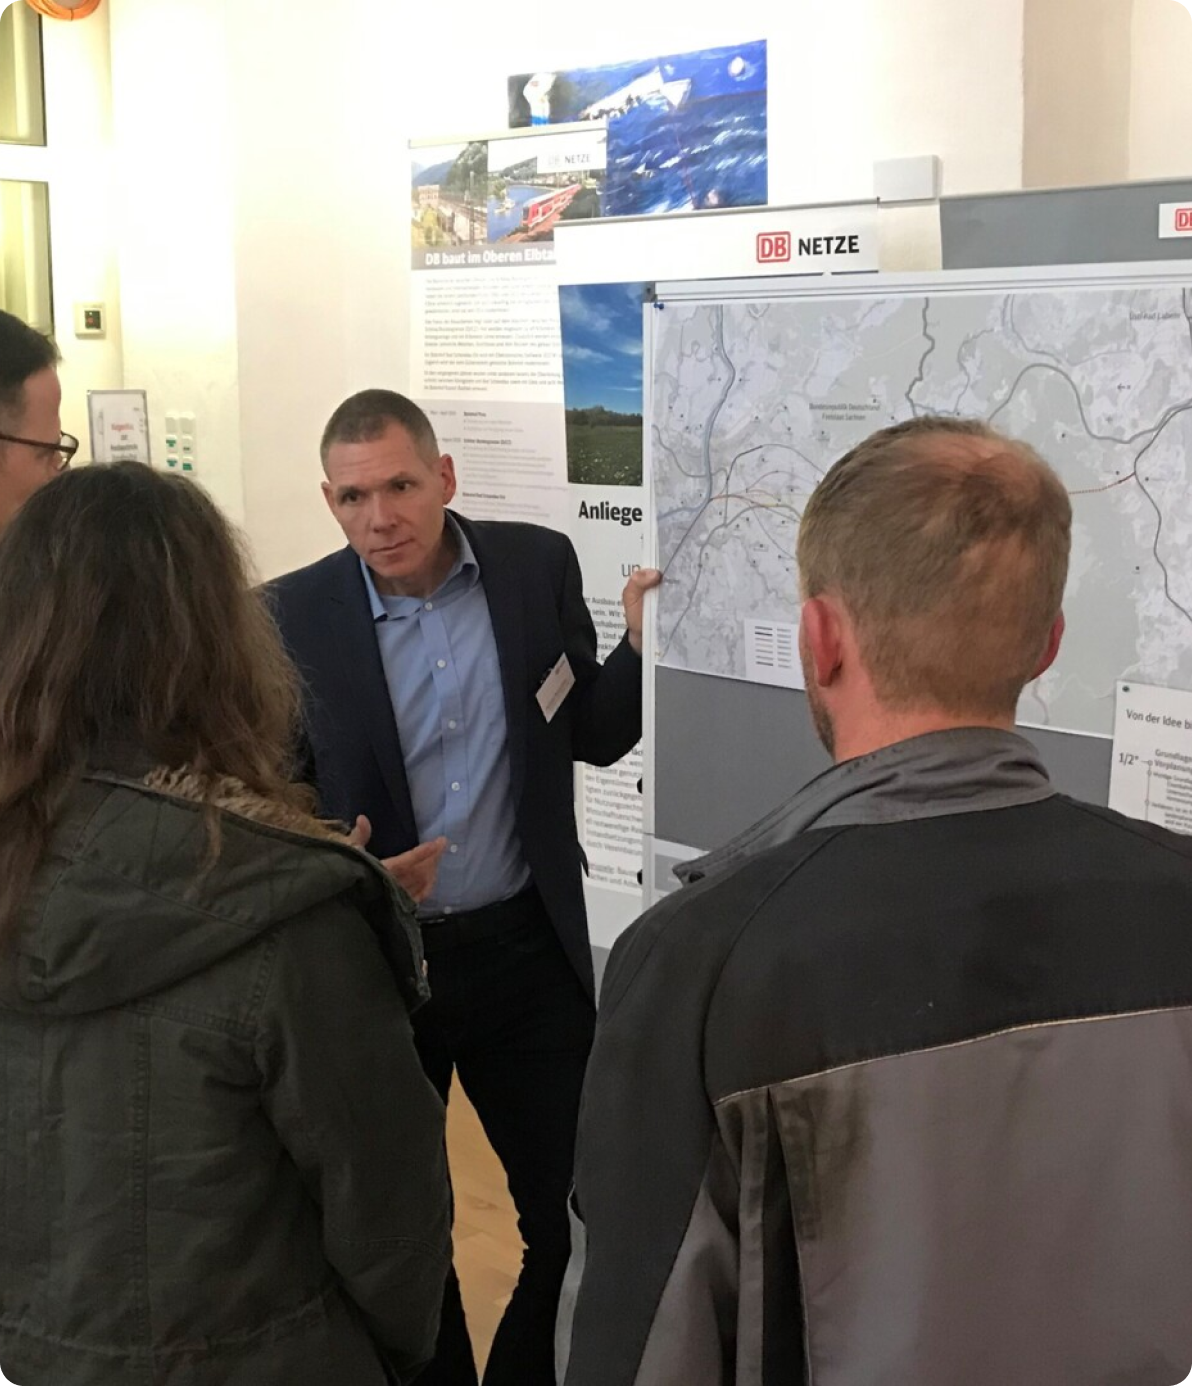 Michael Menschner, subproject manager of the Dresden to Heidenau section, stands at the whiteboard showing a map of the project area. He is facing three people who are looking at him and the map.